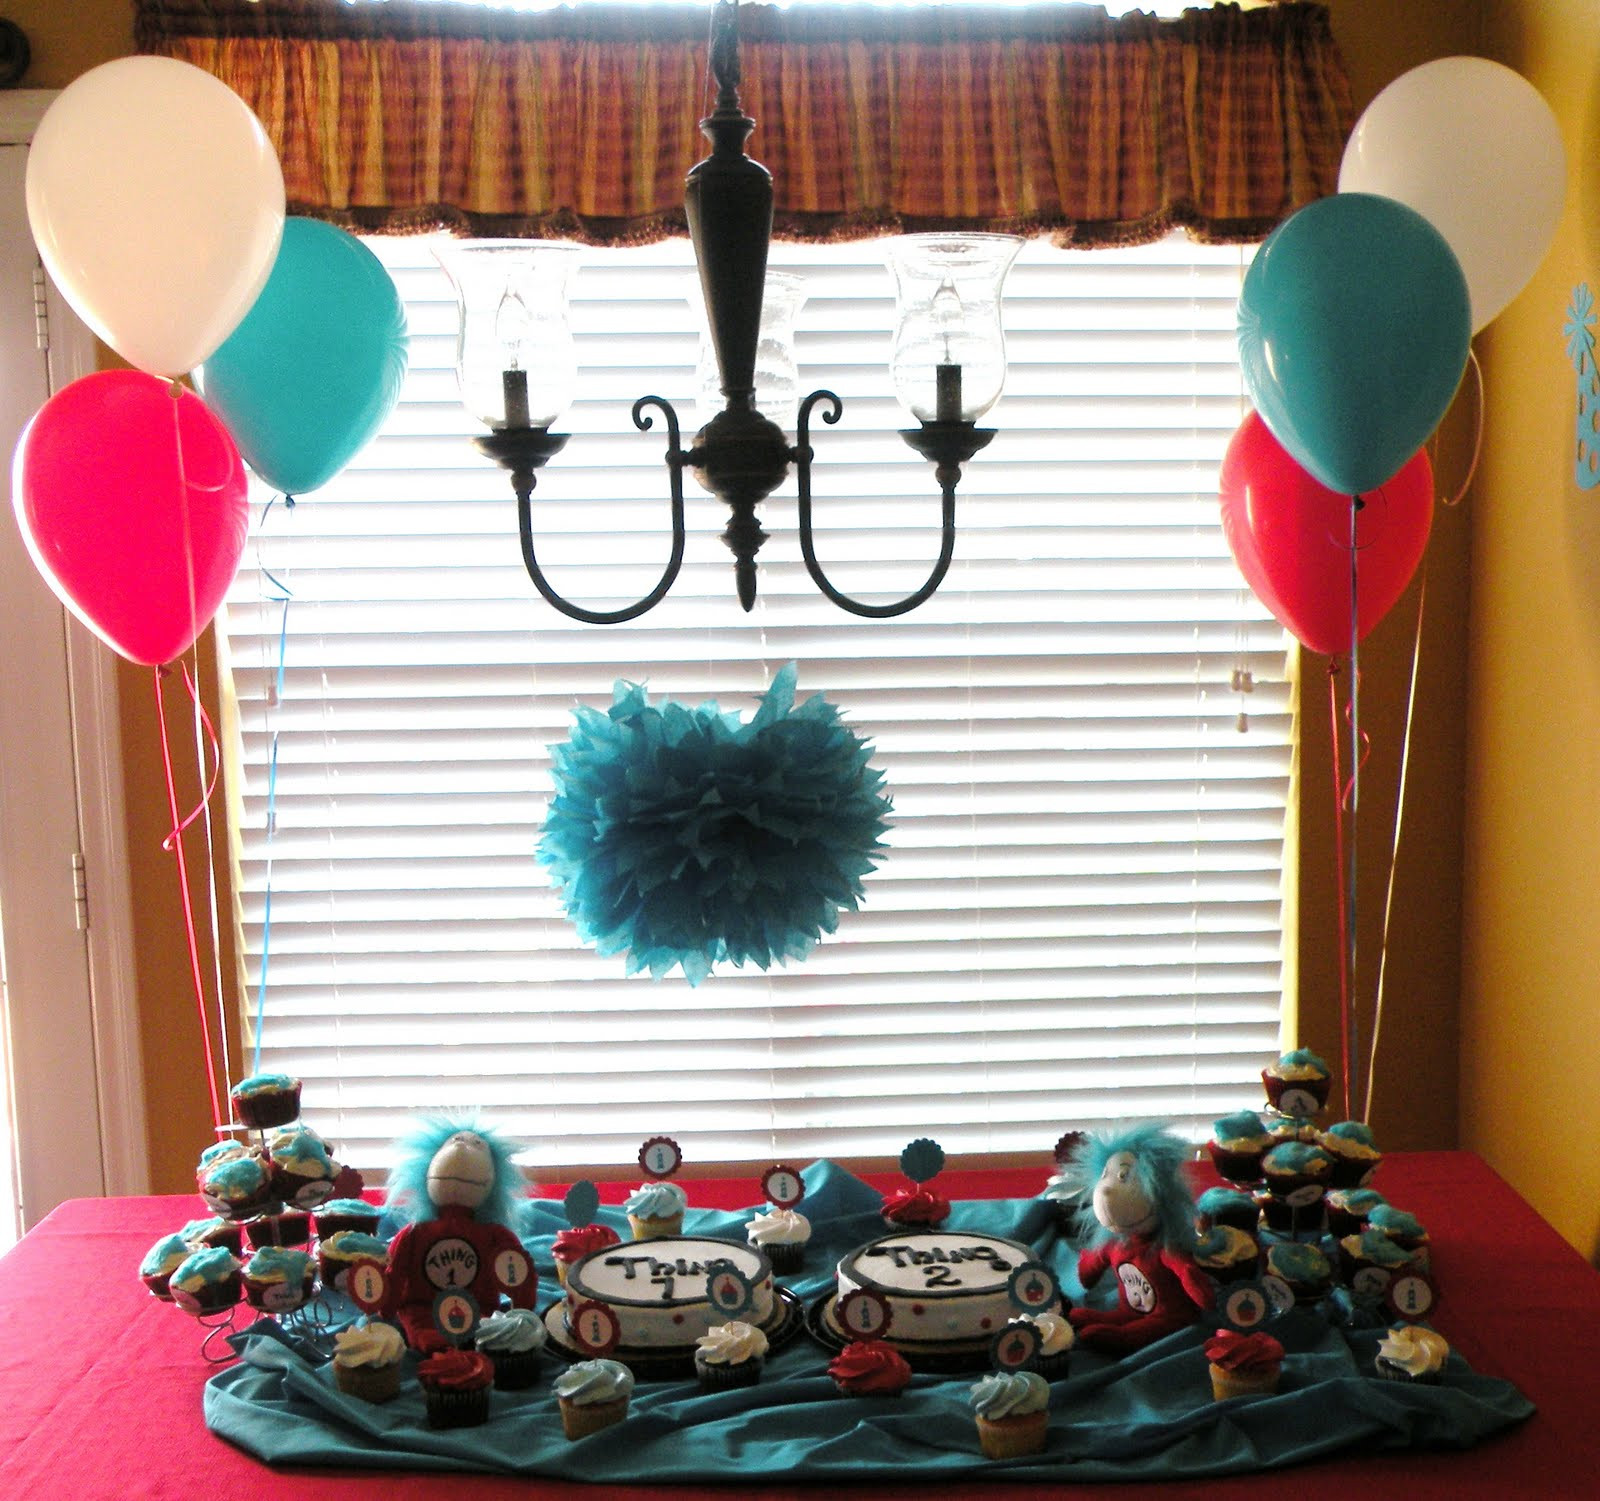 Thing 1 And Thing 2 Birthday Party Supplies
 Dr Seuss Thing 1 & Thing 2 Birthday Party